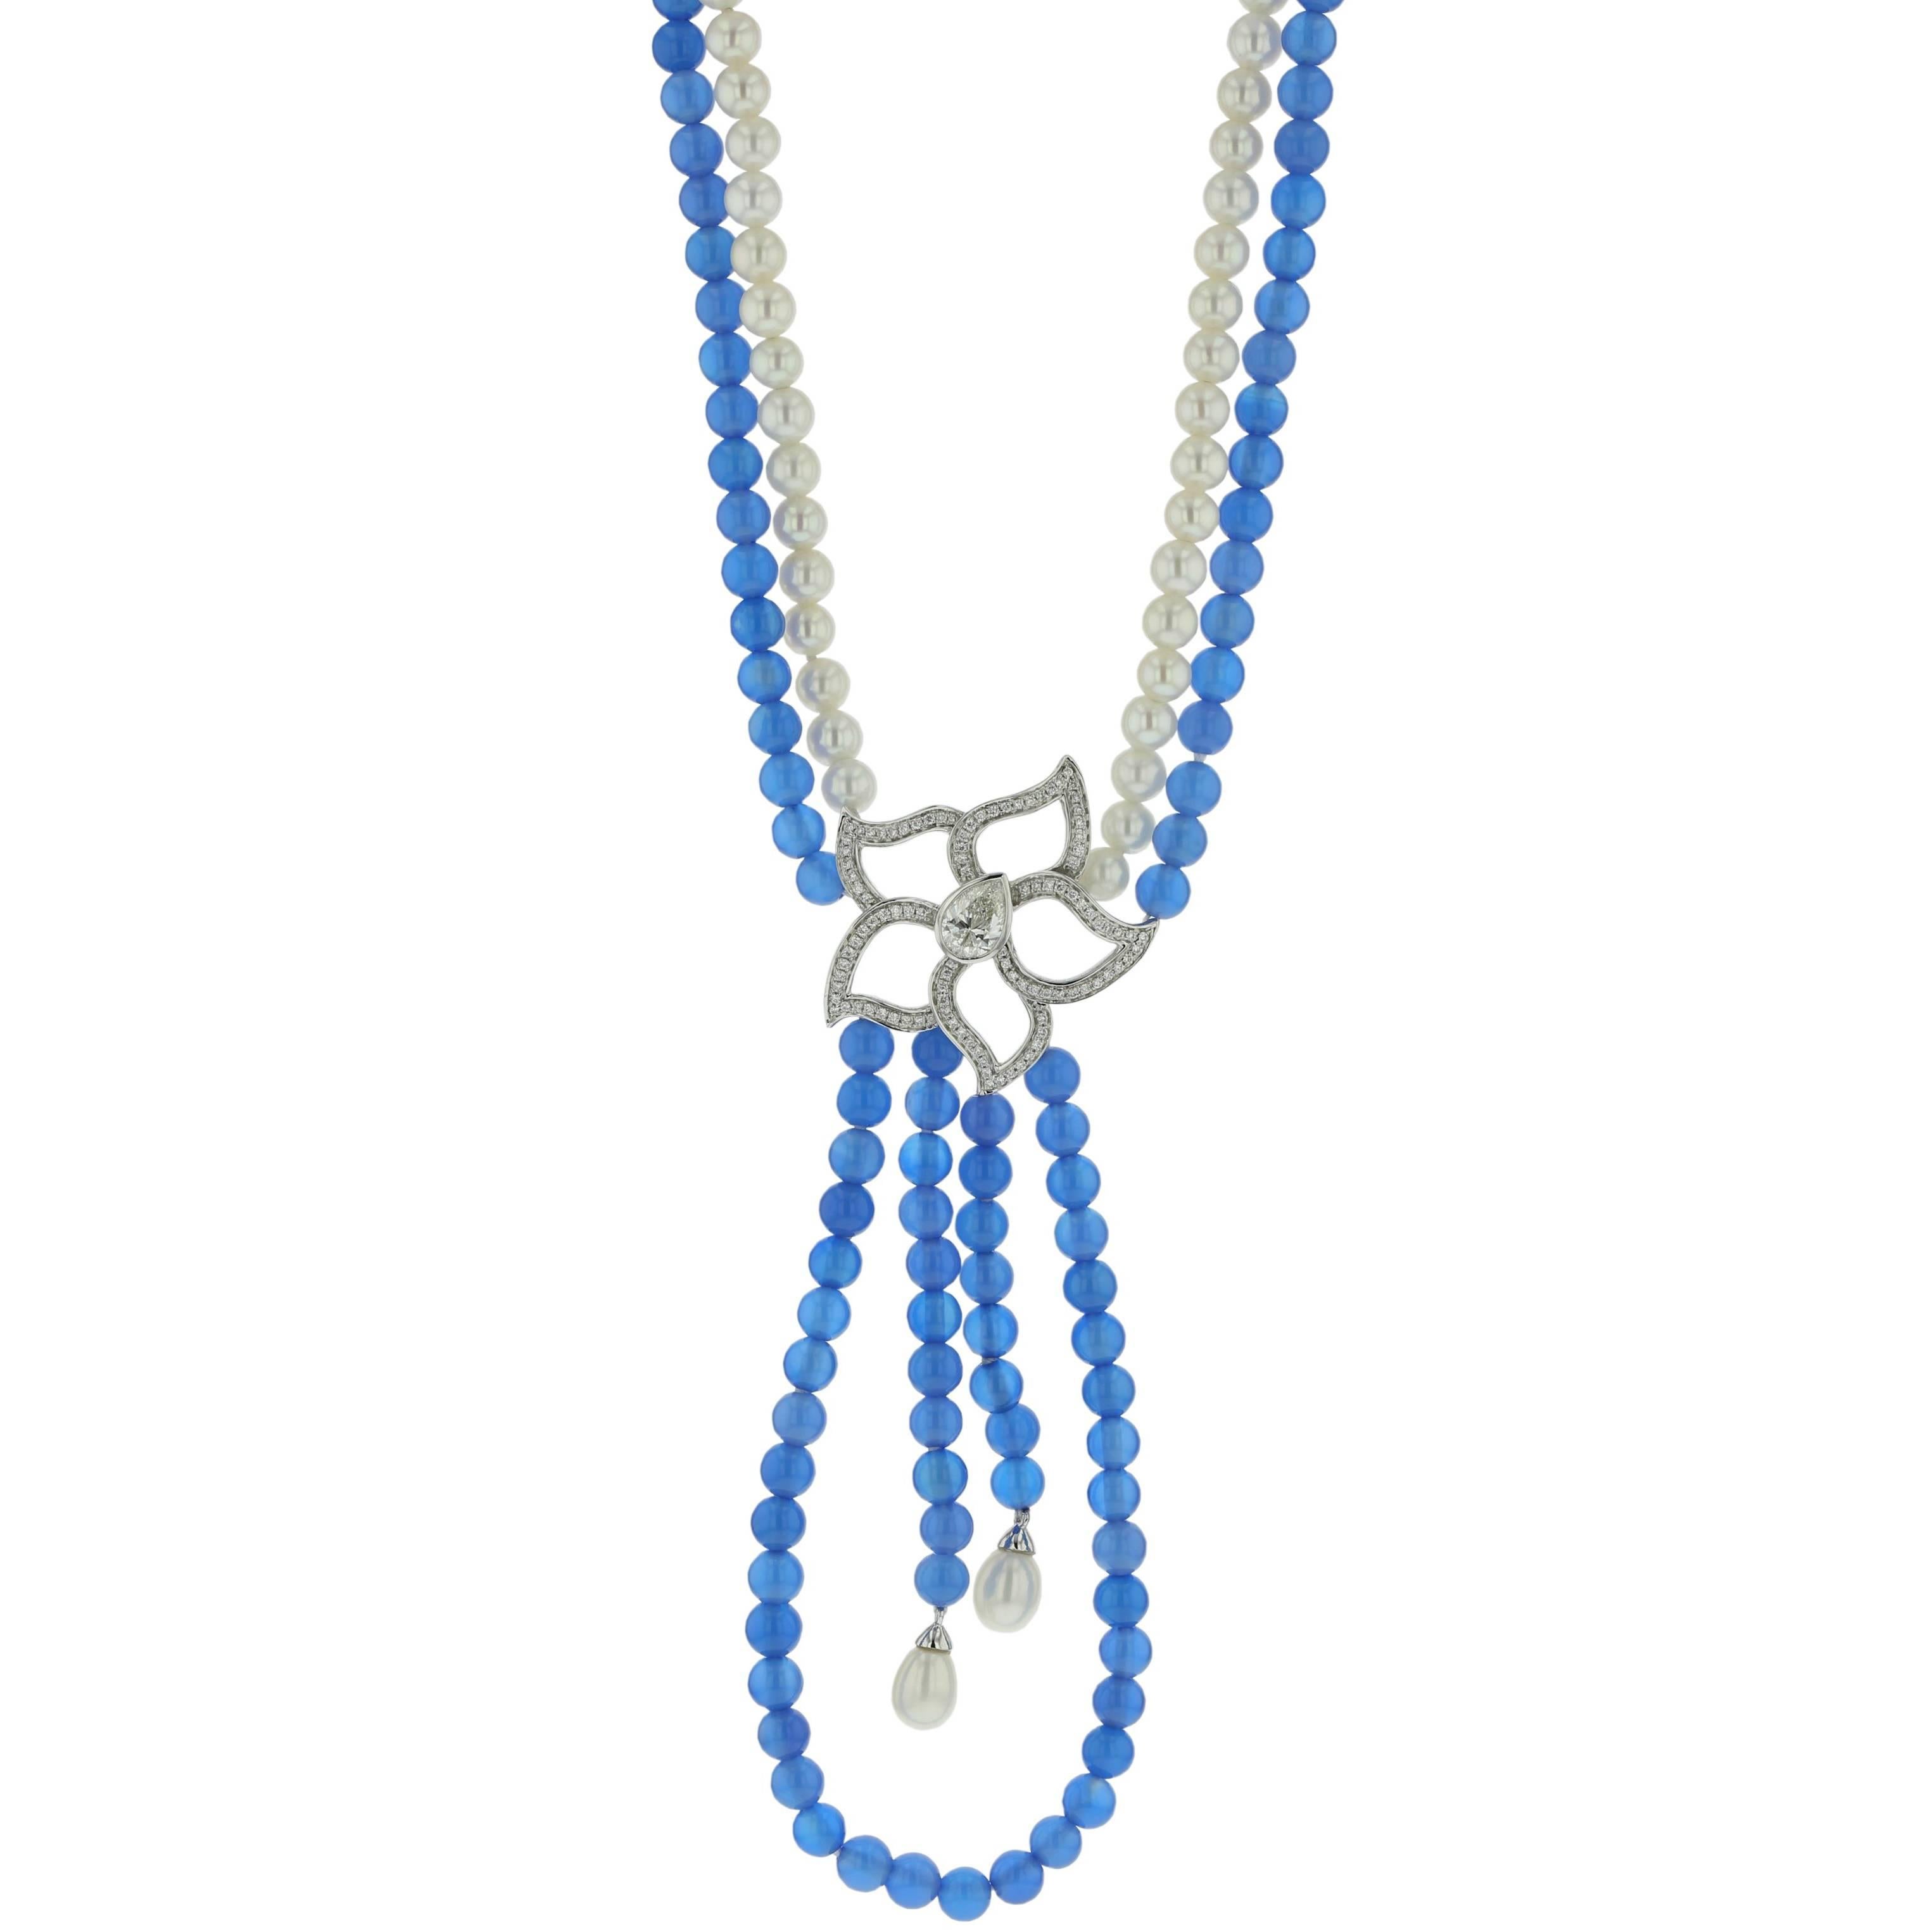 Necklace White Gold 18 Karat 5.80g Blue Chalcedony 77.45 Carat For Sale